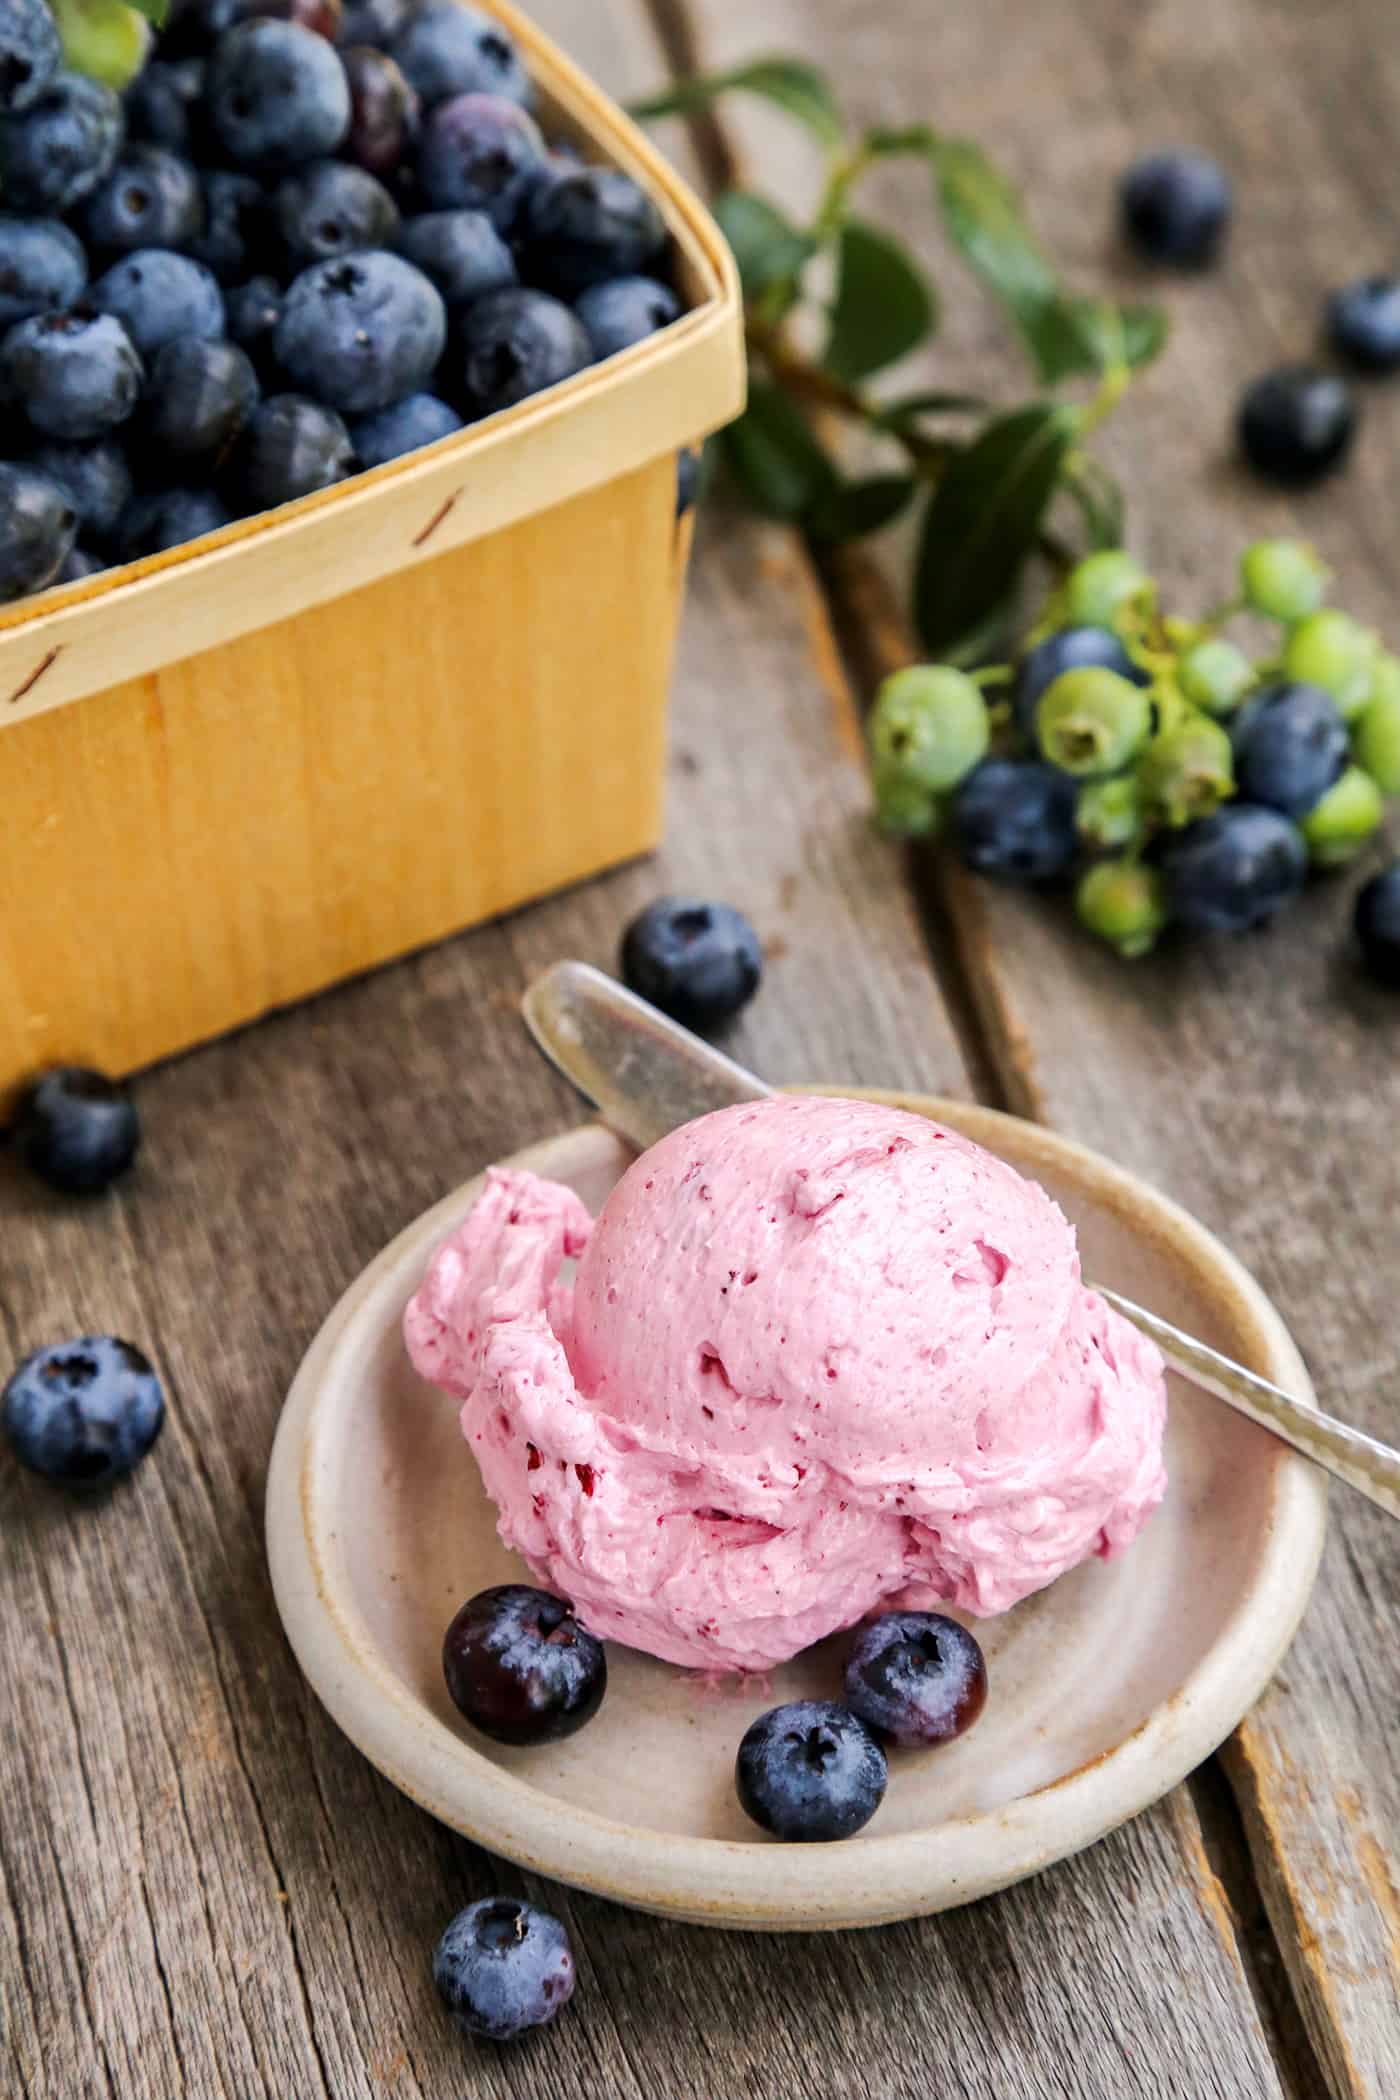 A scoop of blueberry butter on a plate